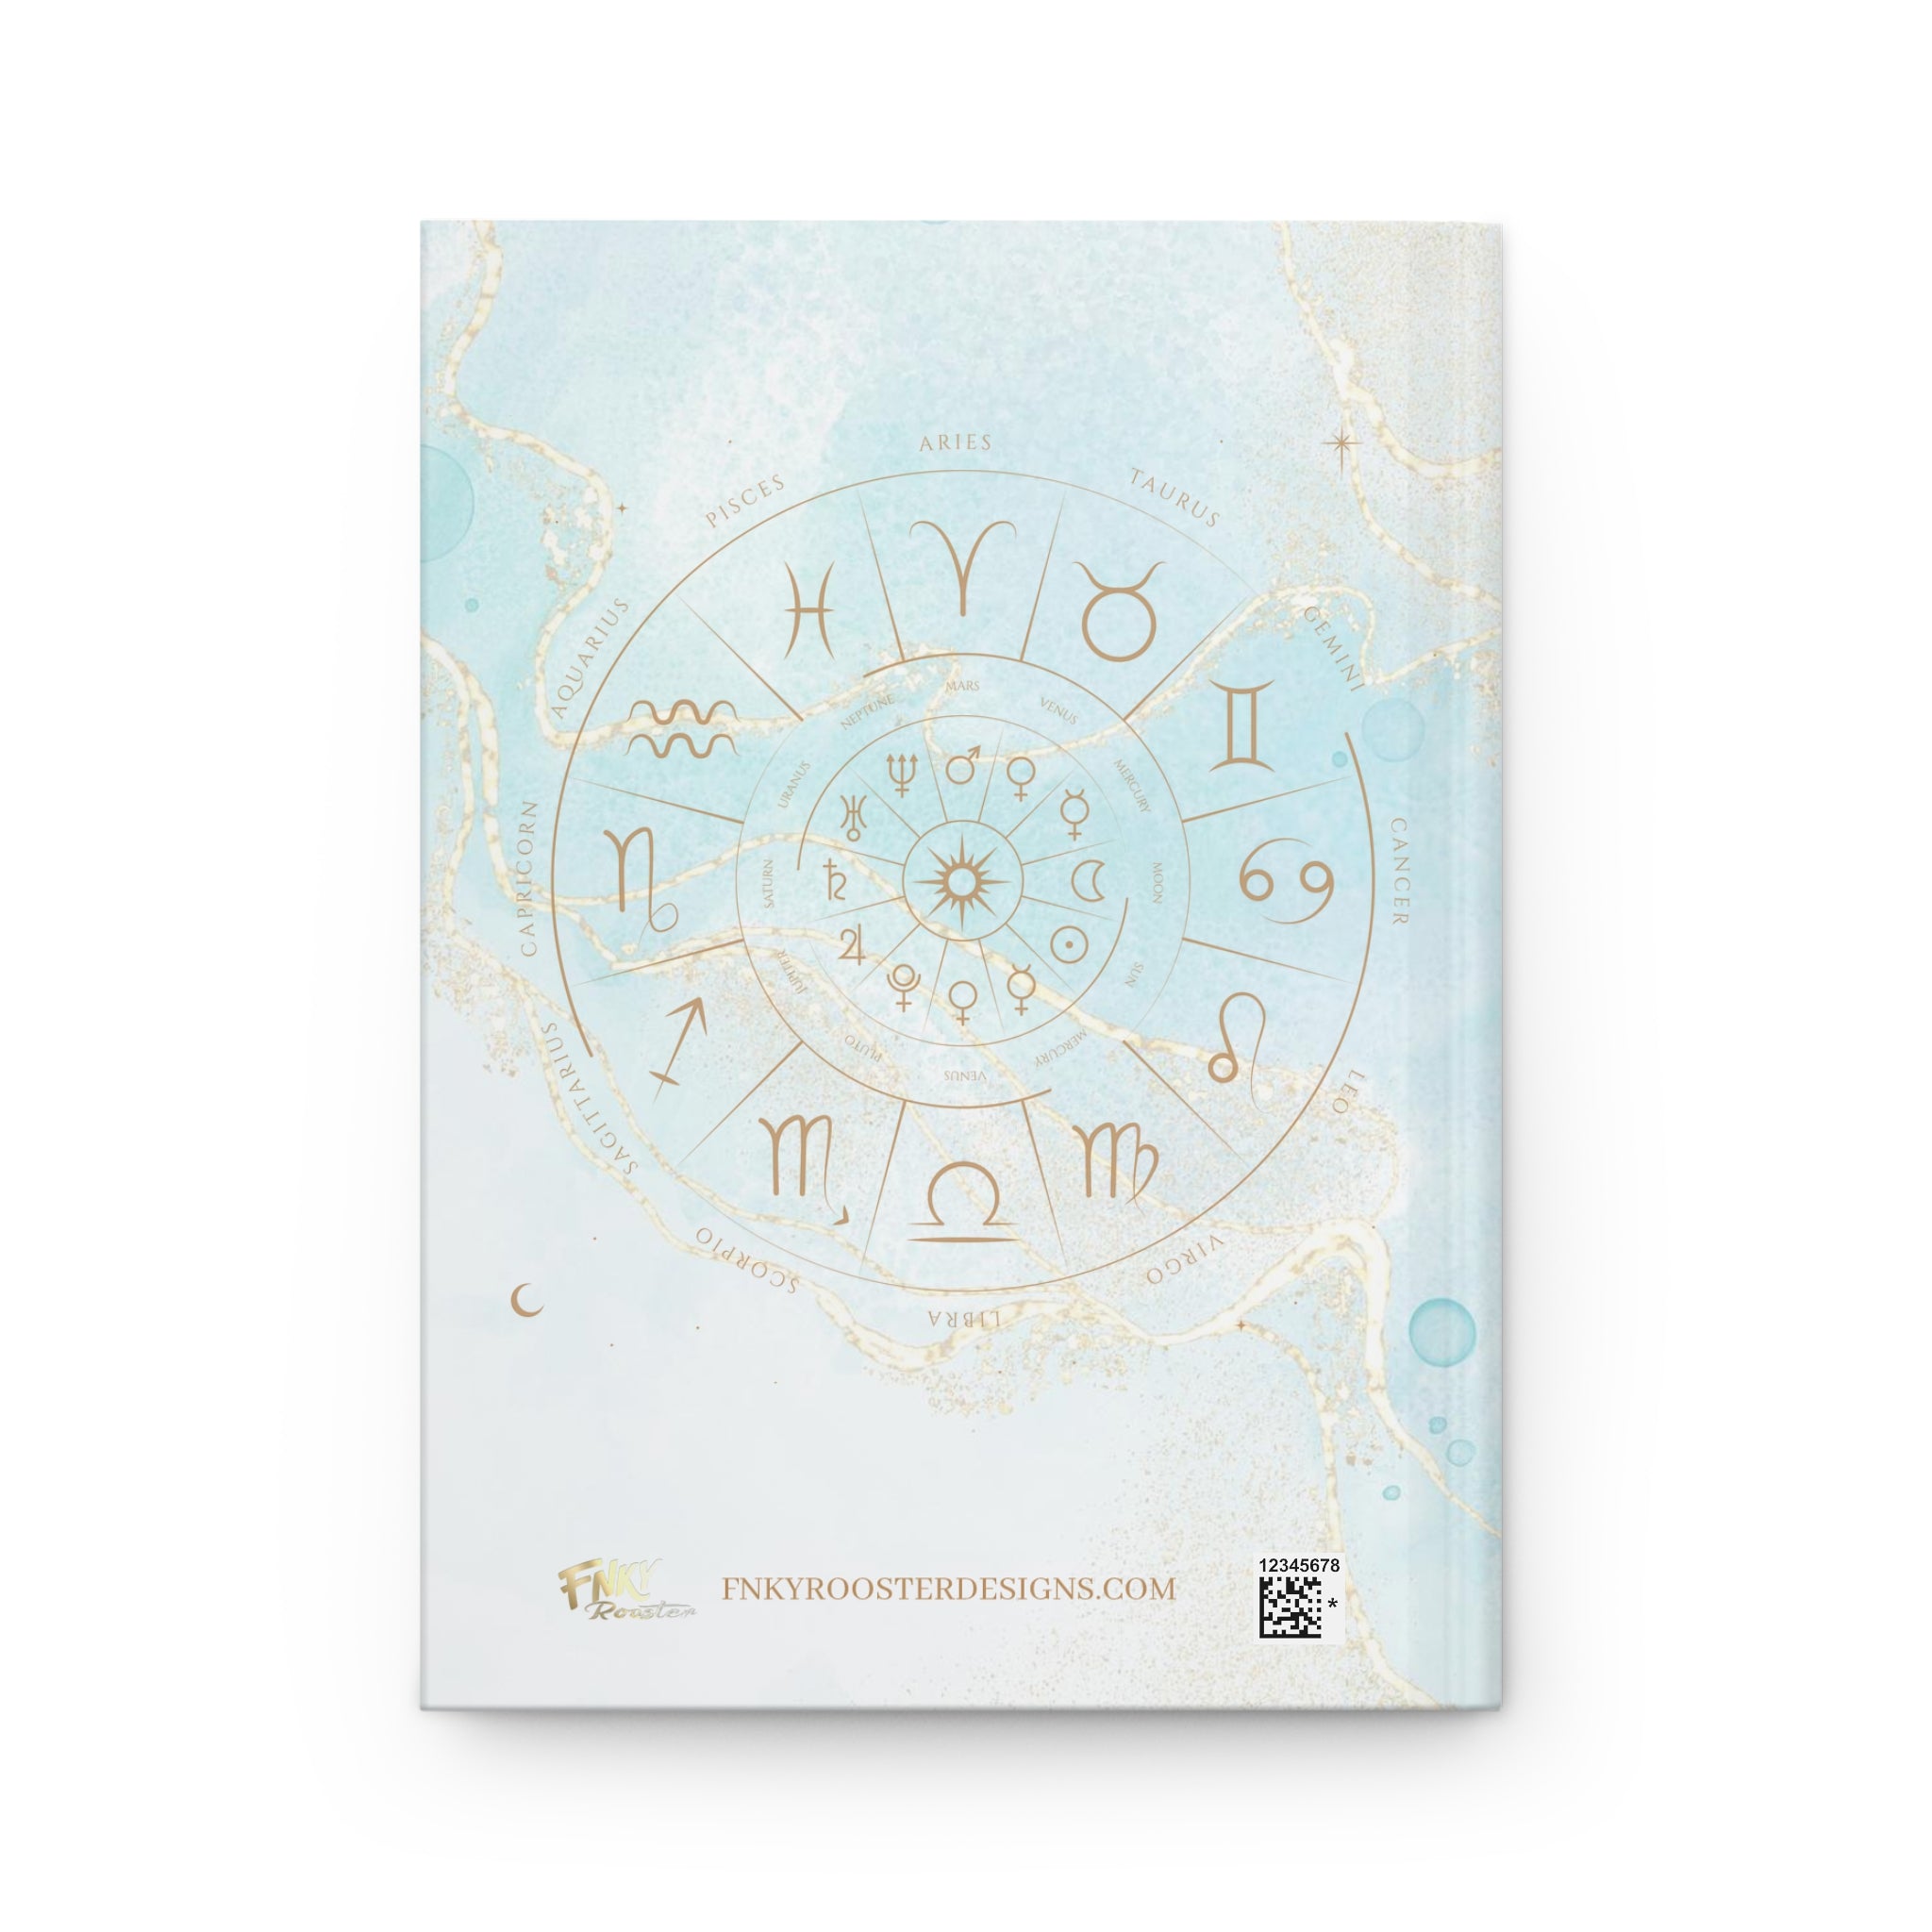 Aquarius Horoscope Zodiac Matte Hardcover Journal – Rule Lined Pages for the Visionary Aquarian